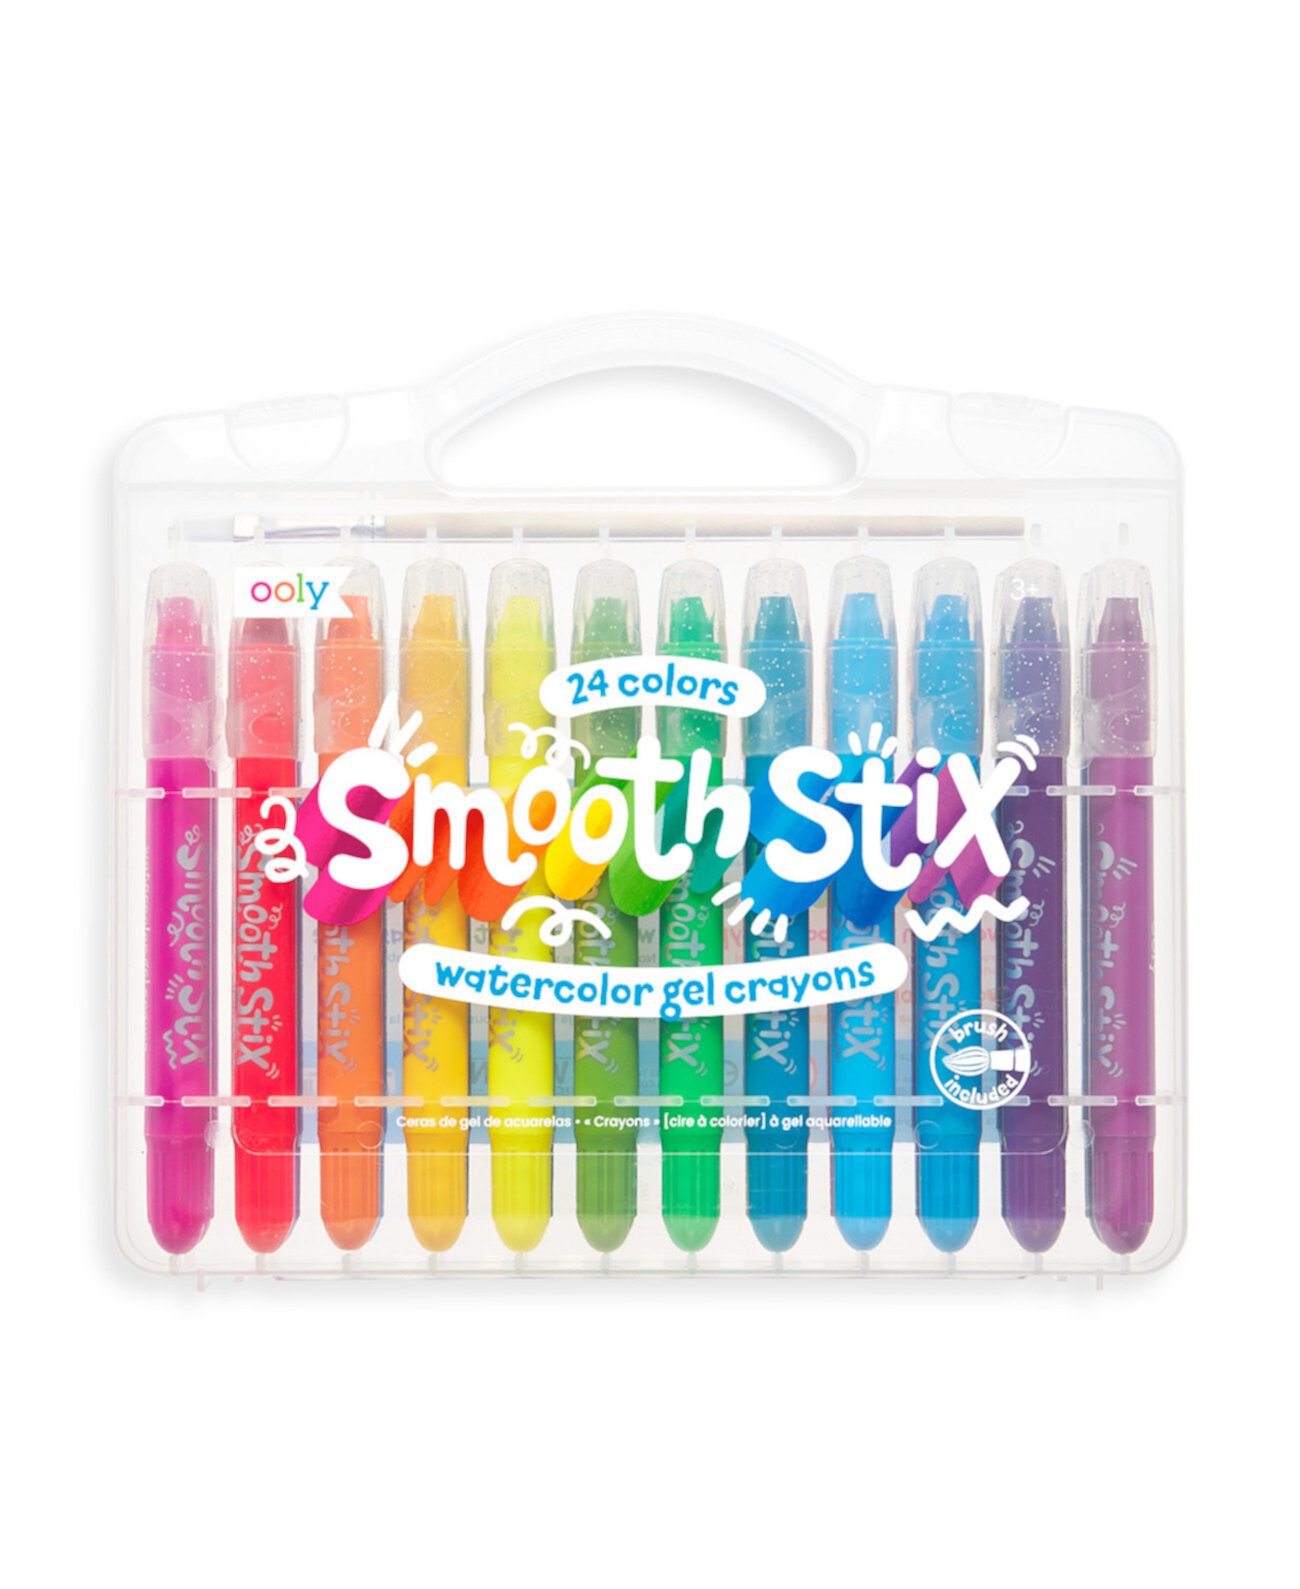 Smooth Stix Crayons, 24 Colors Ooly